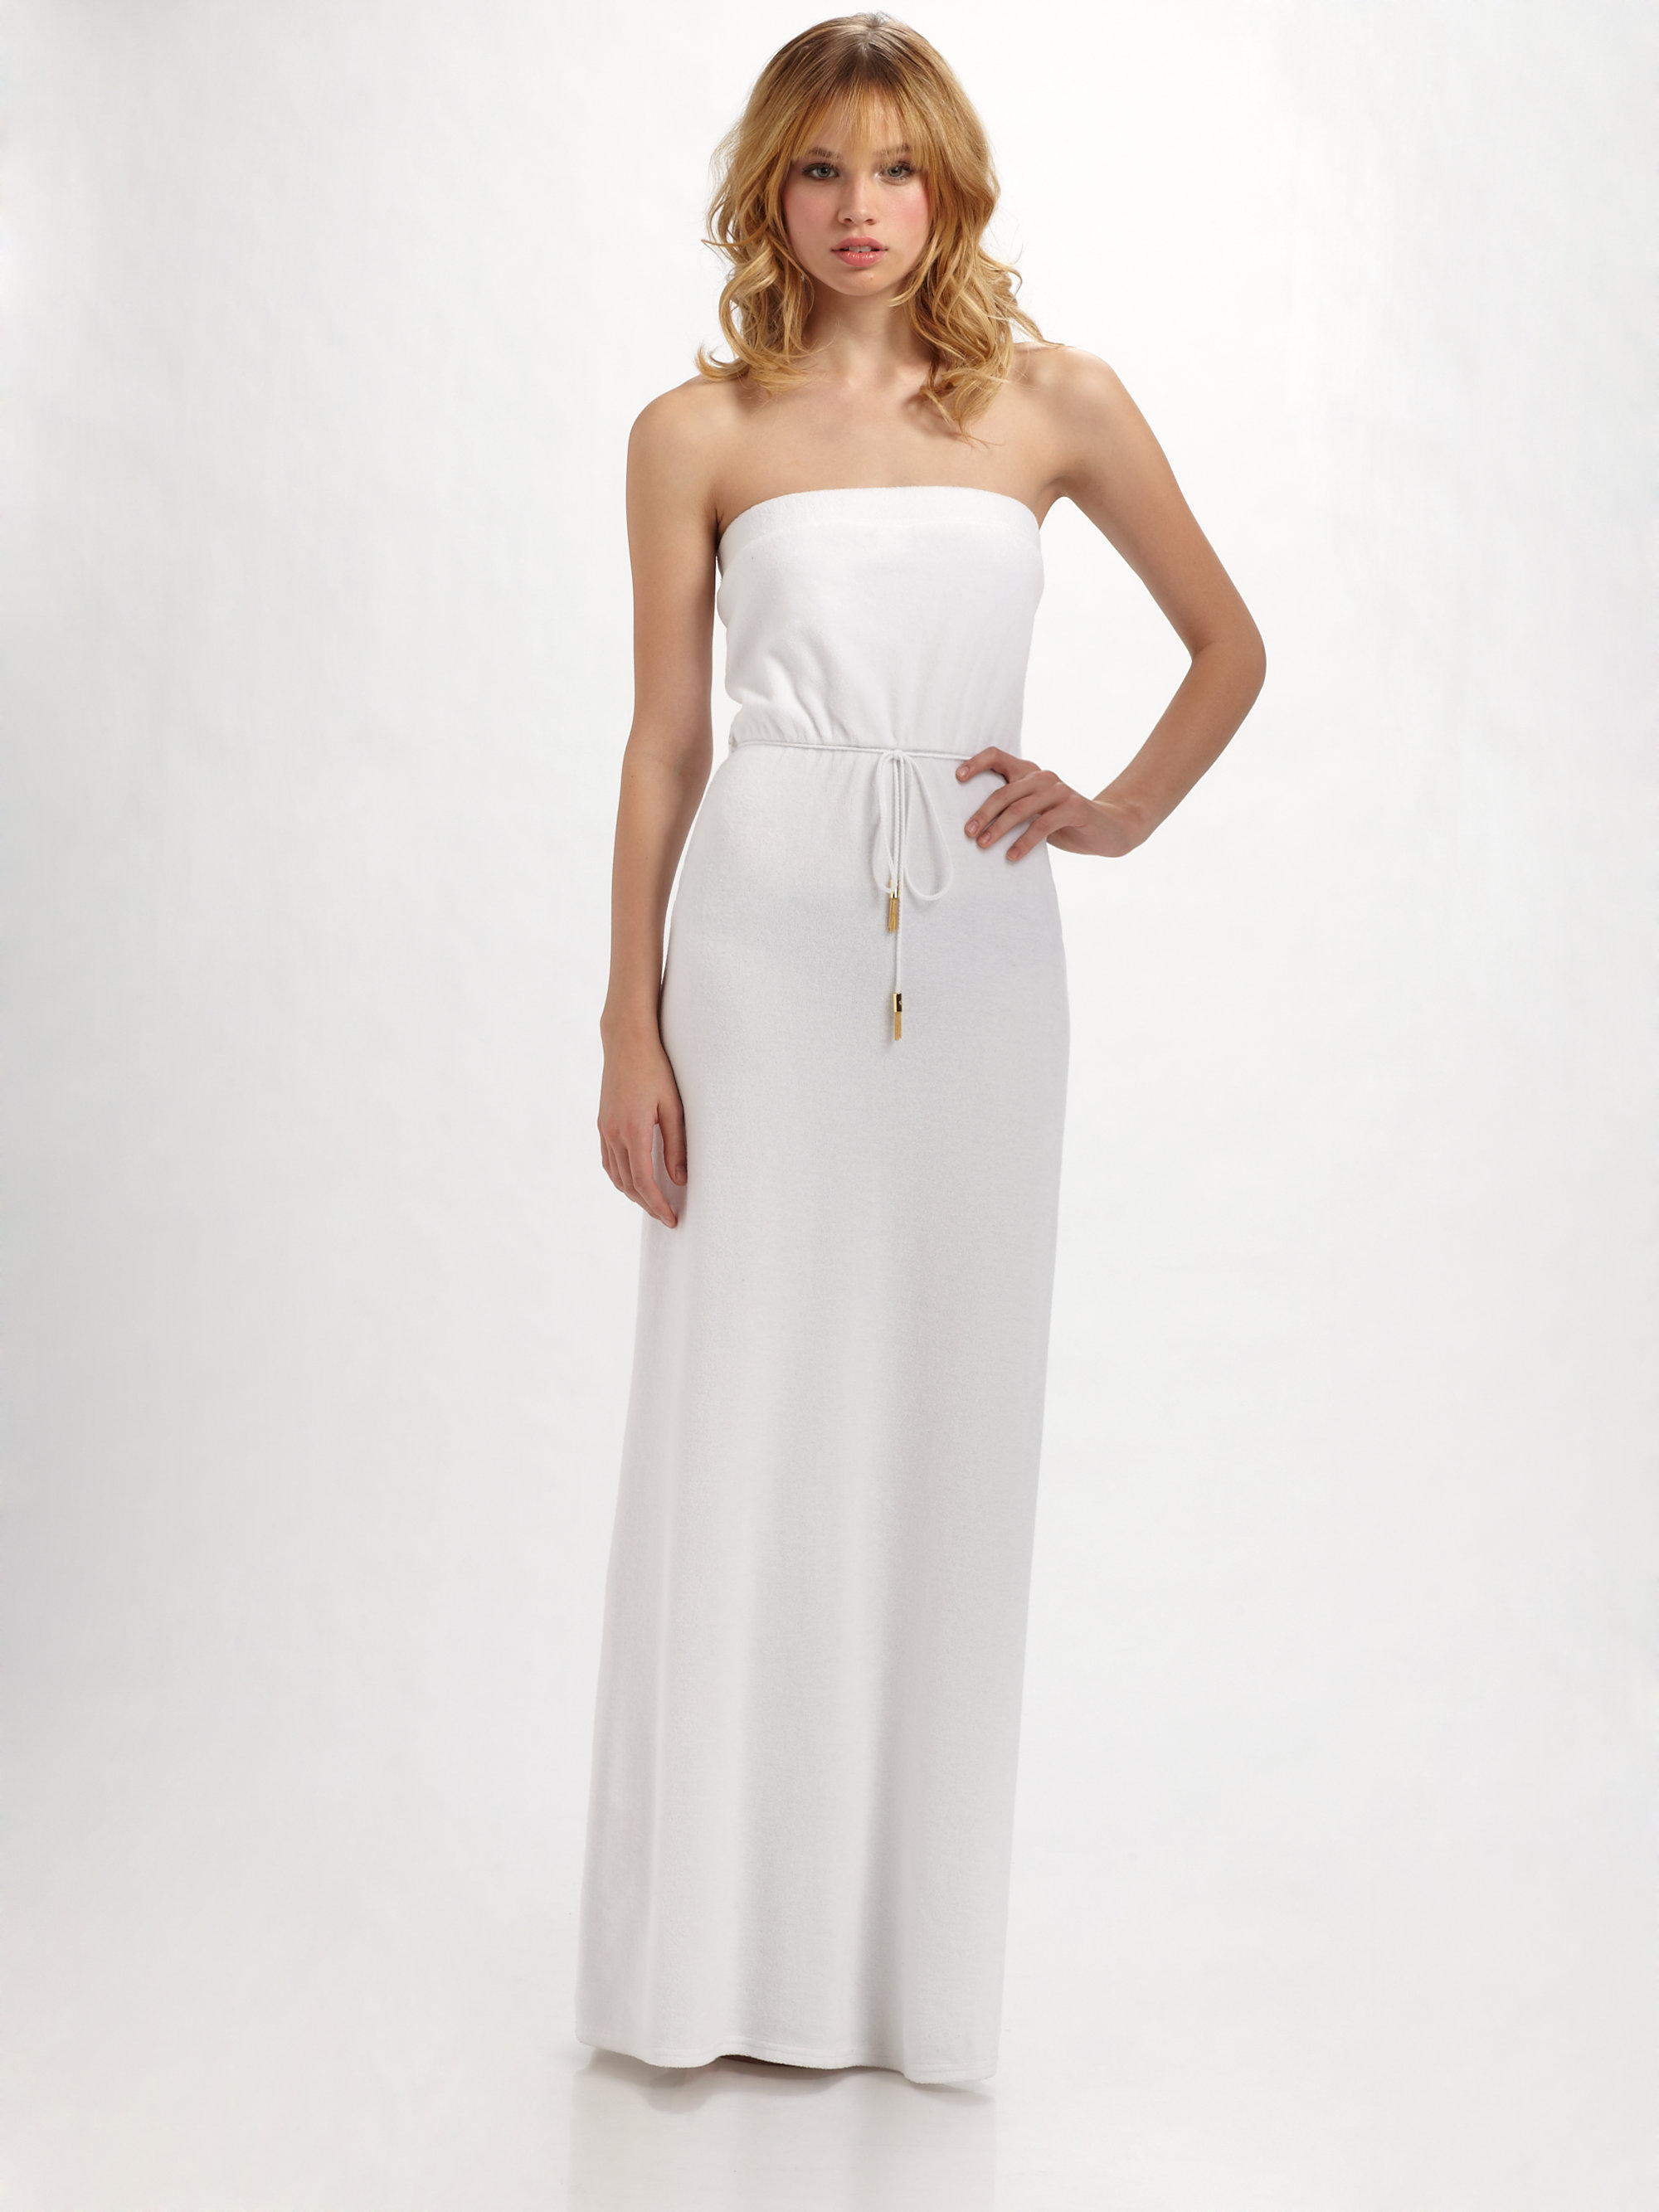 Lyst - Juicy couture Terry Strapless Maxi Dress in White